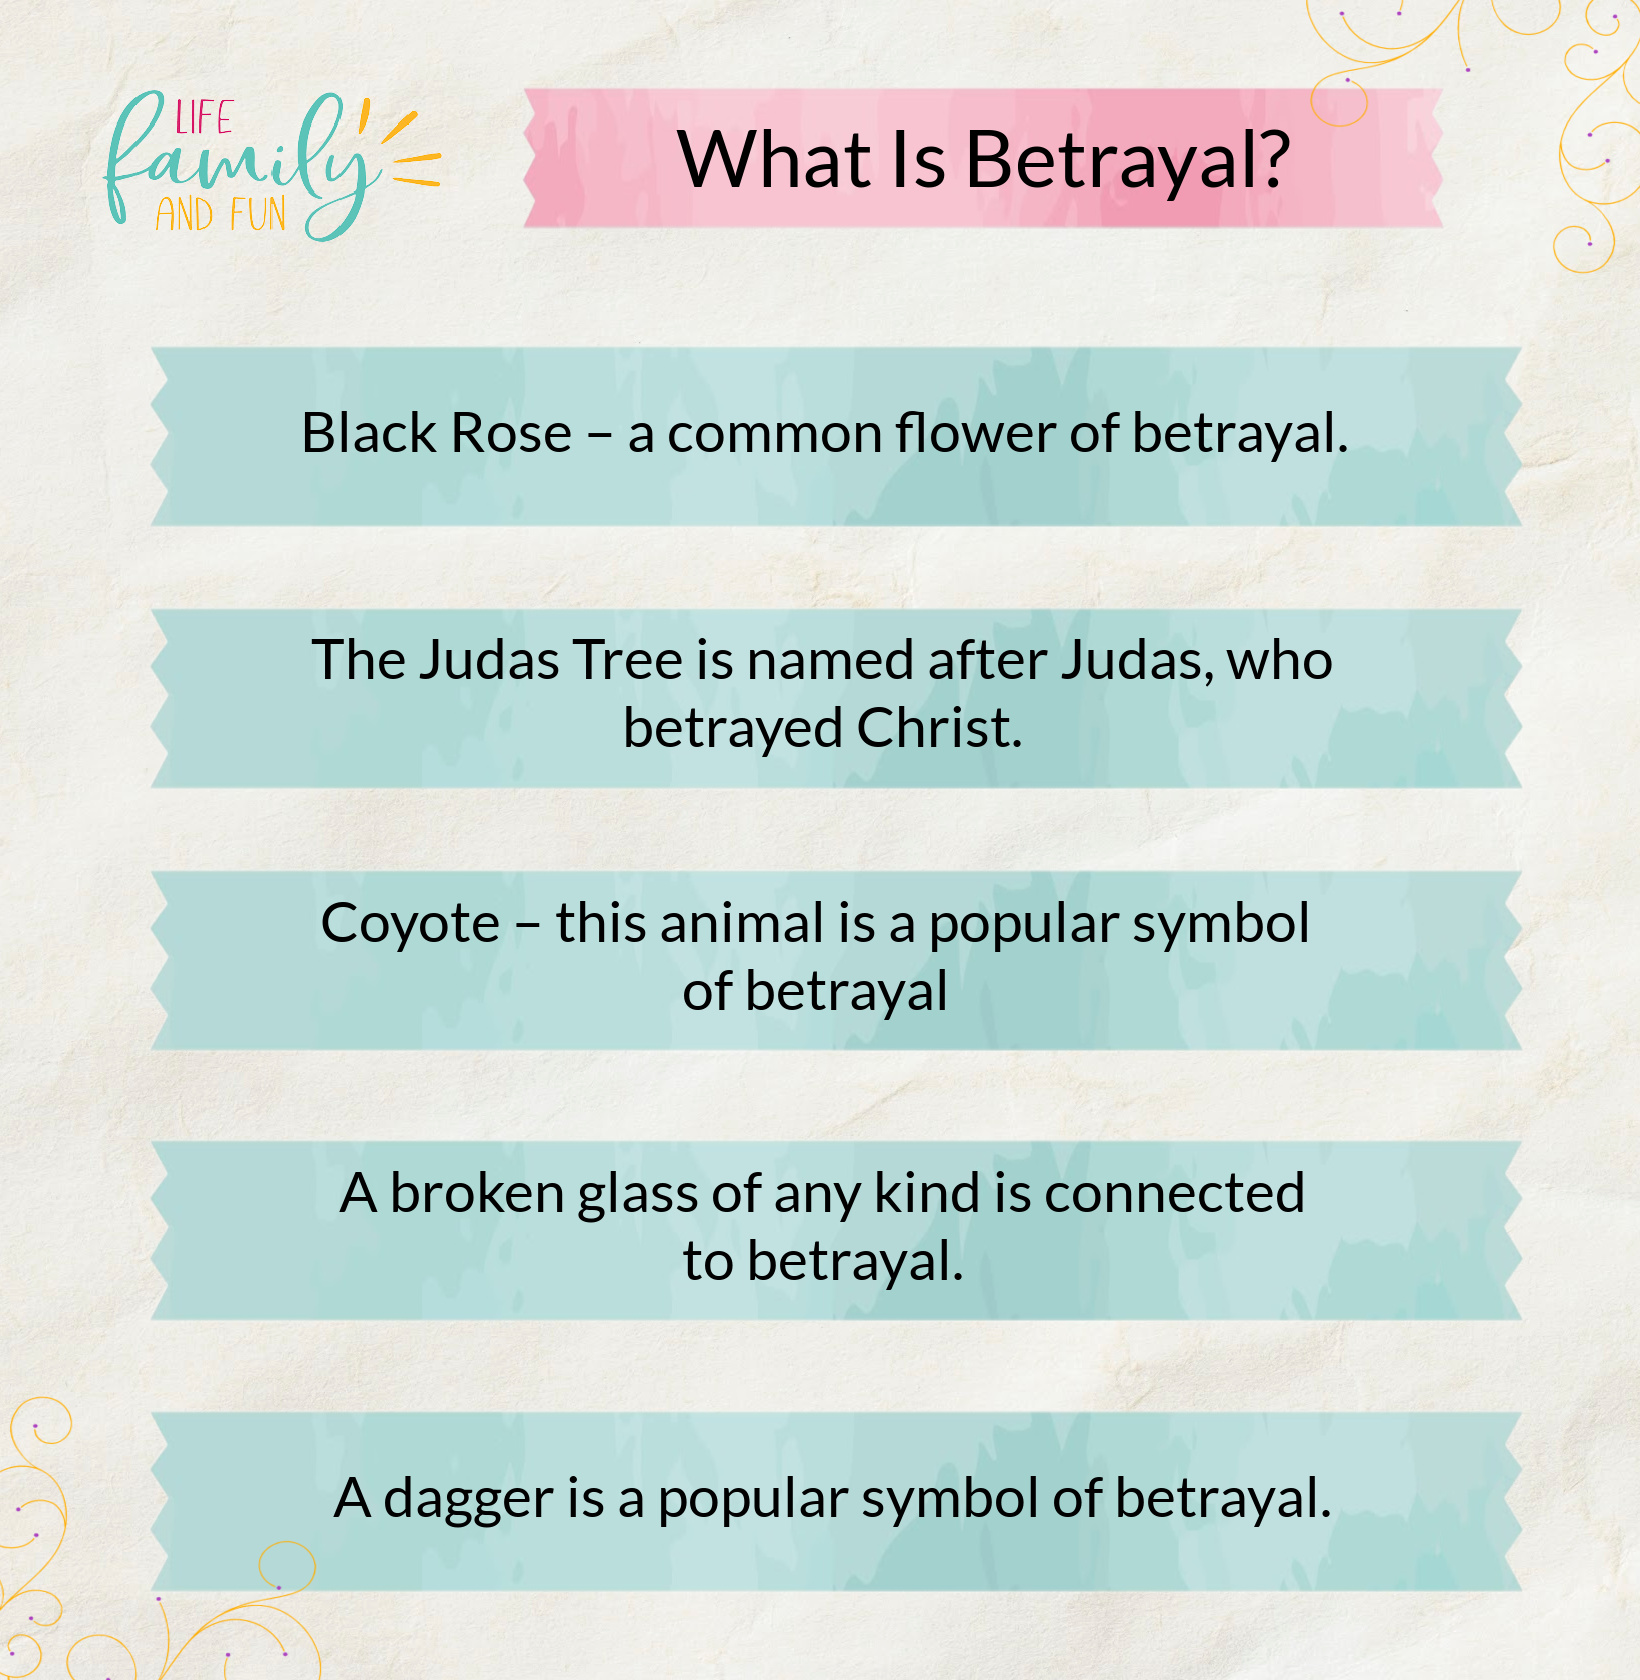 What Is Betrayal?